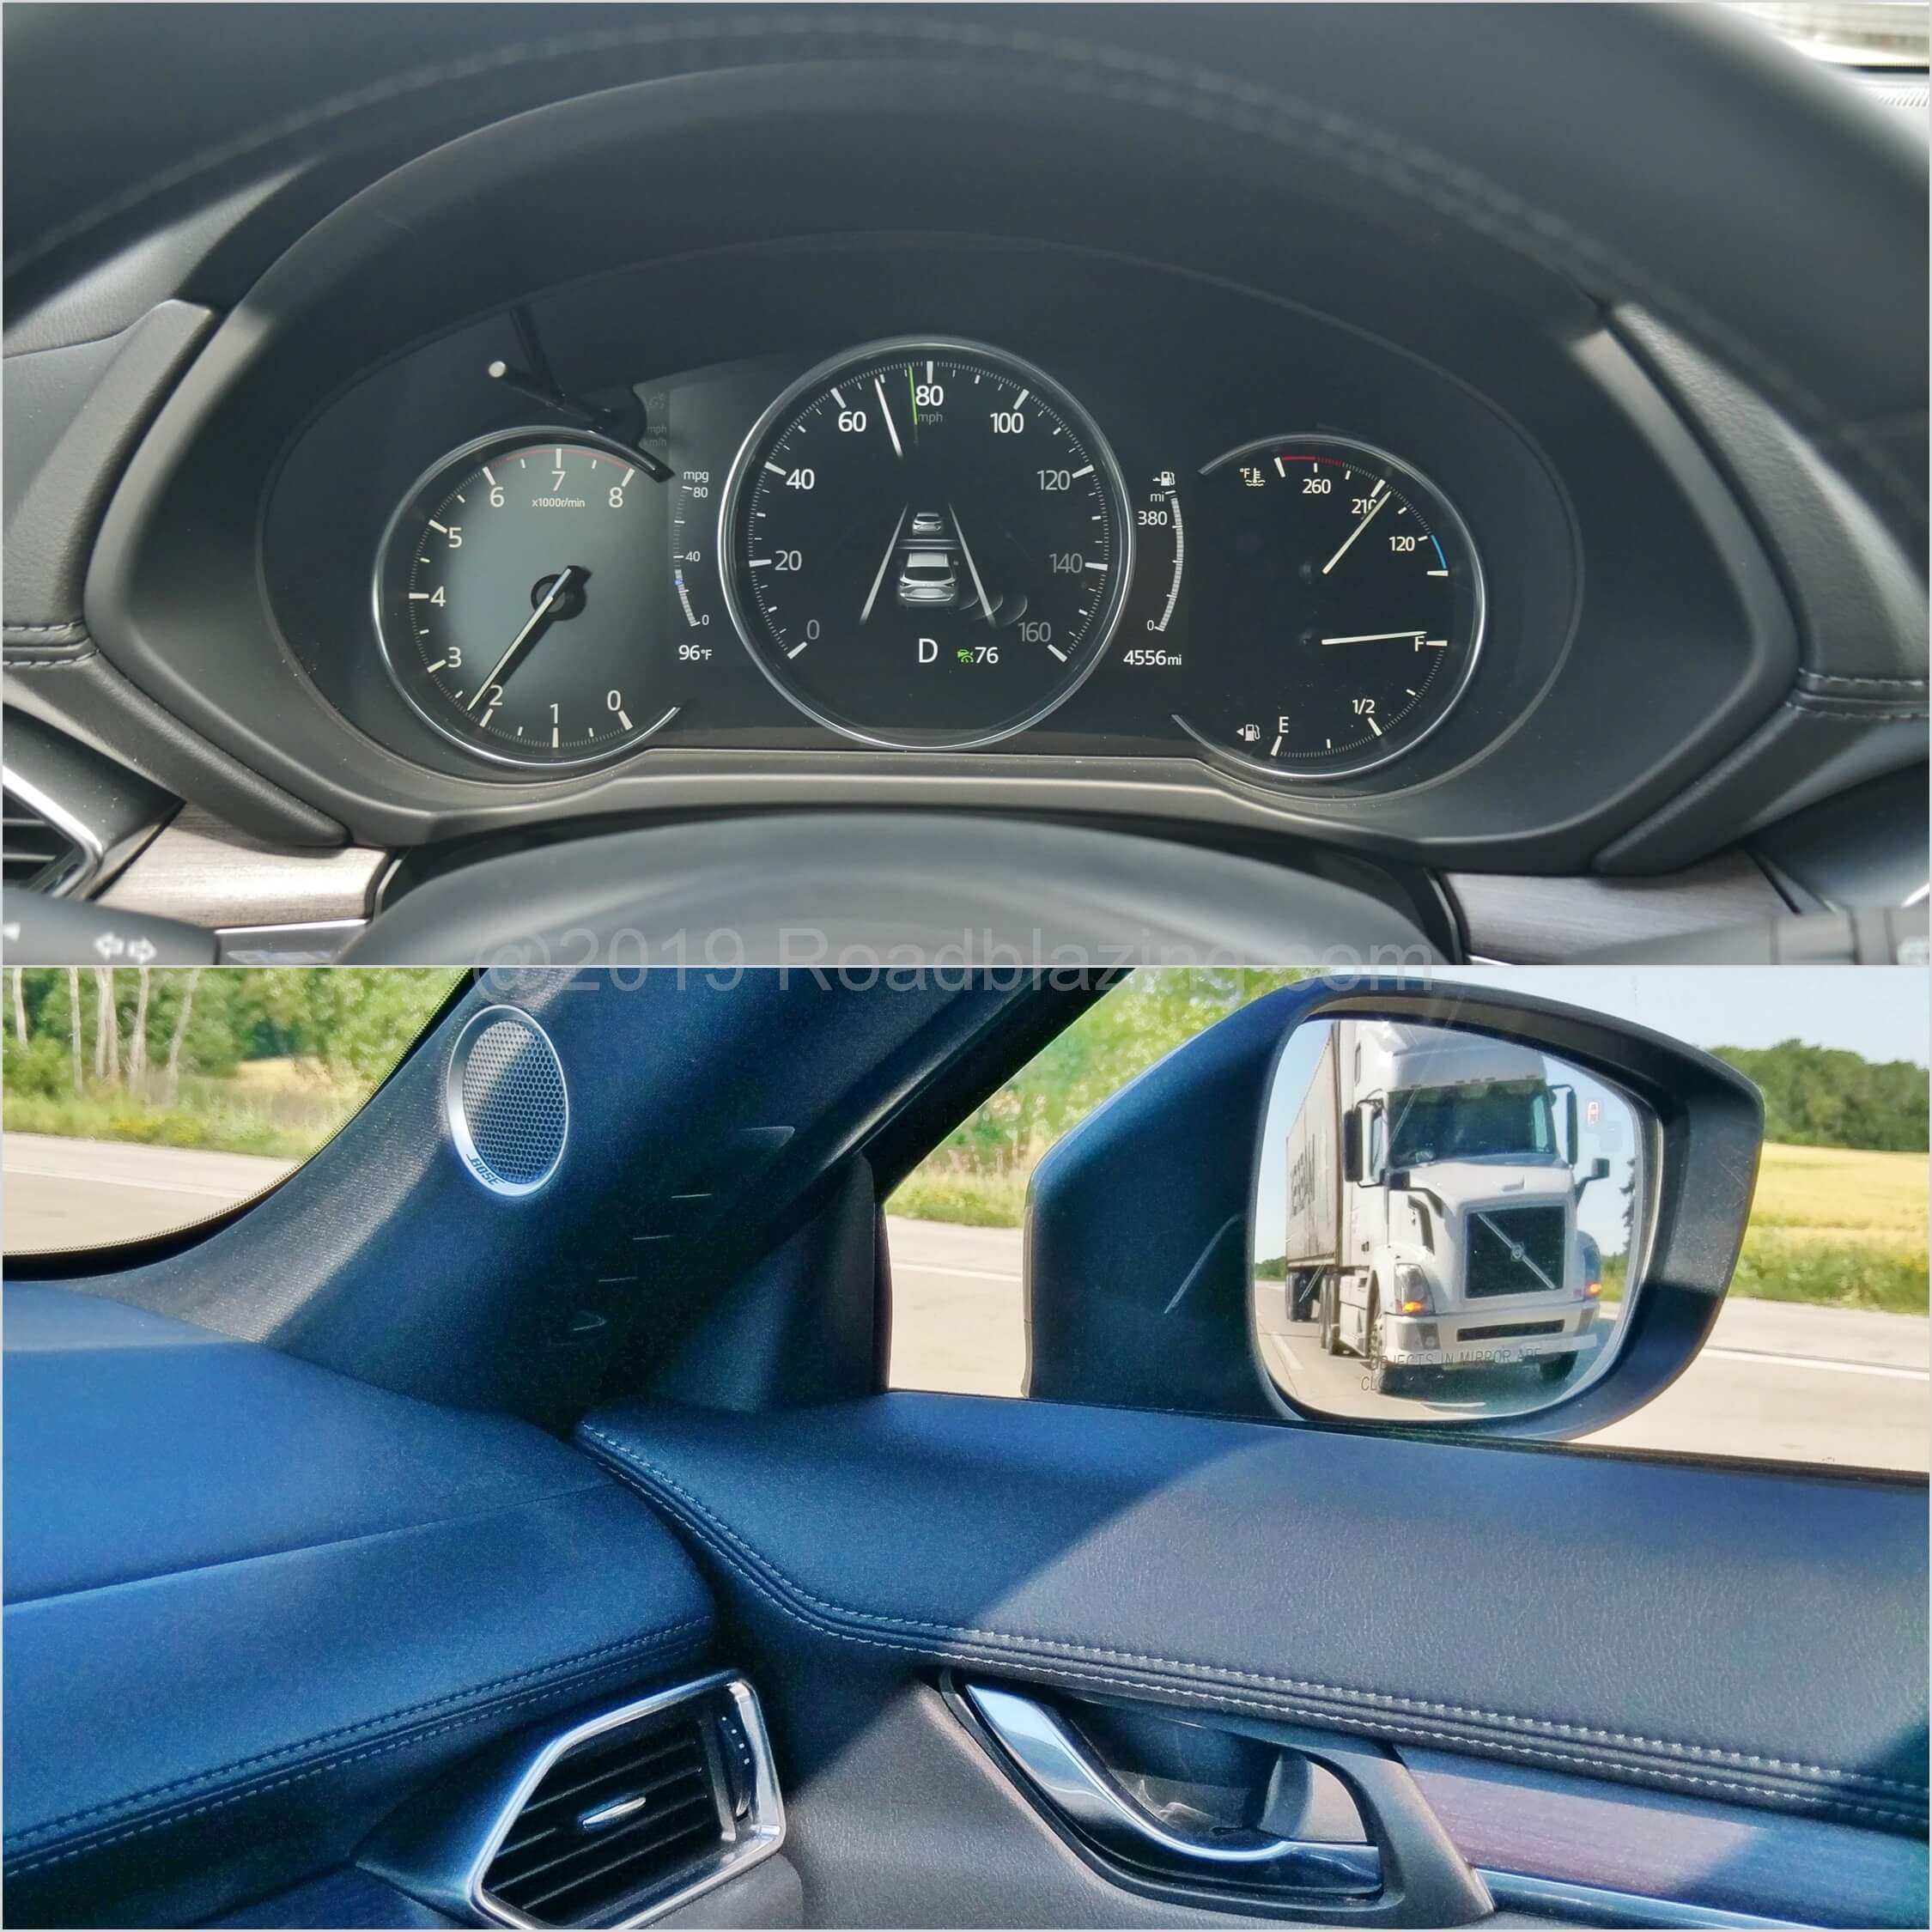 2019 Mazda CX-5 Signature AWD: standard i-Activesense blind spot warning simultaneously displays in TFT virtual gauge cluster and wing mirrors.